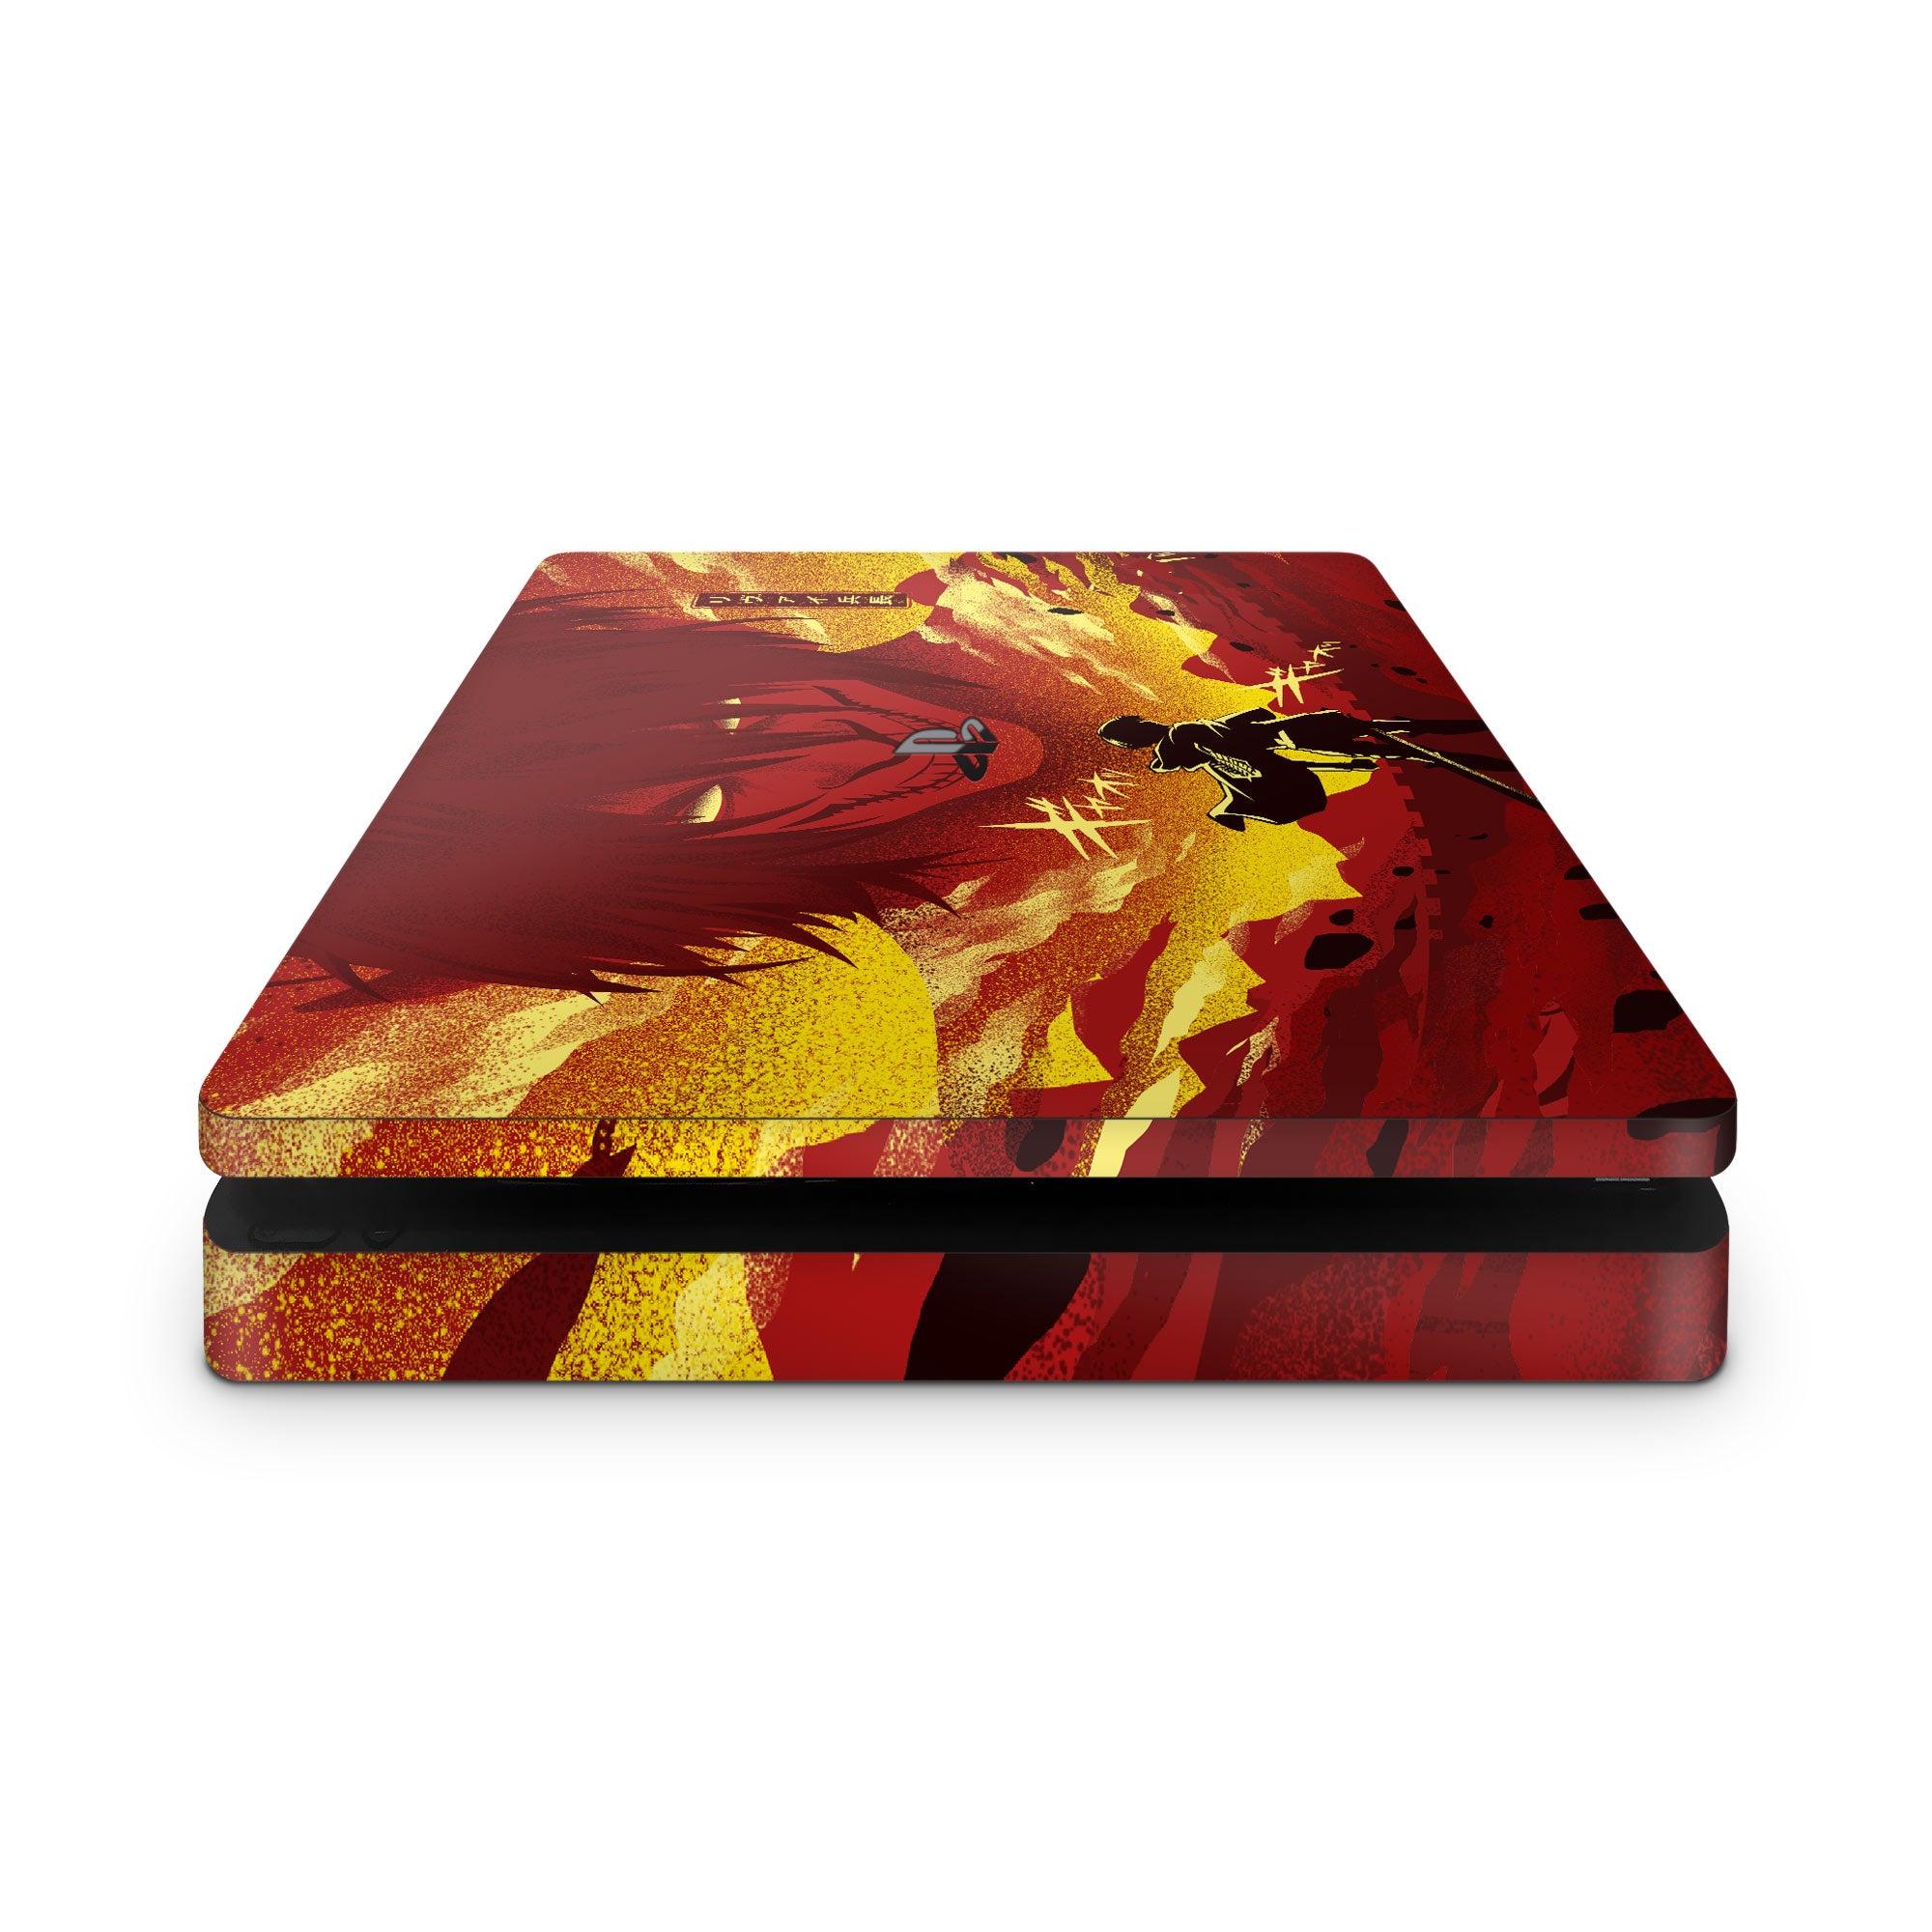 Humanity's Strongest - PS4 Slim Console Skin